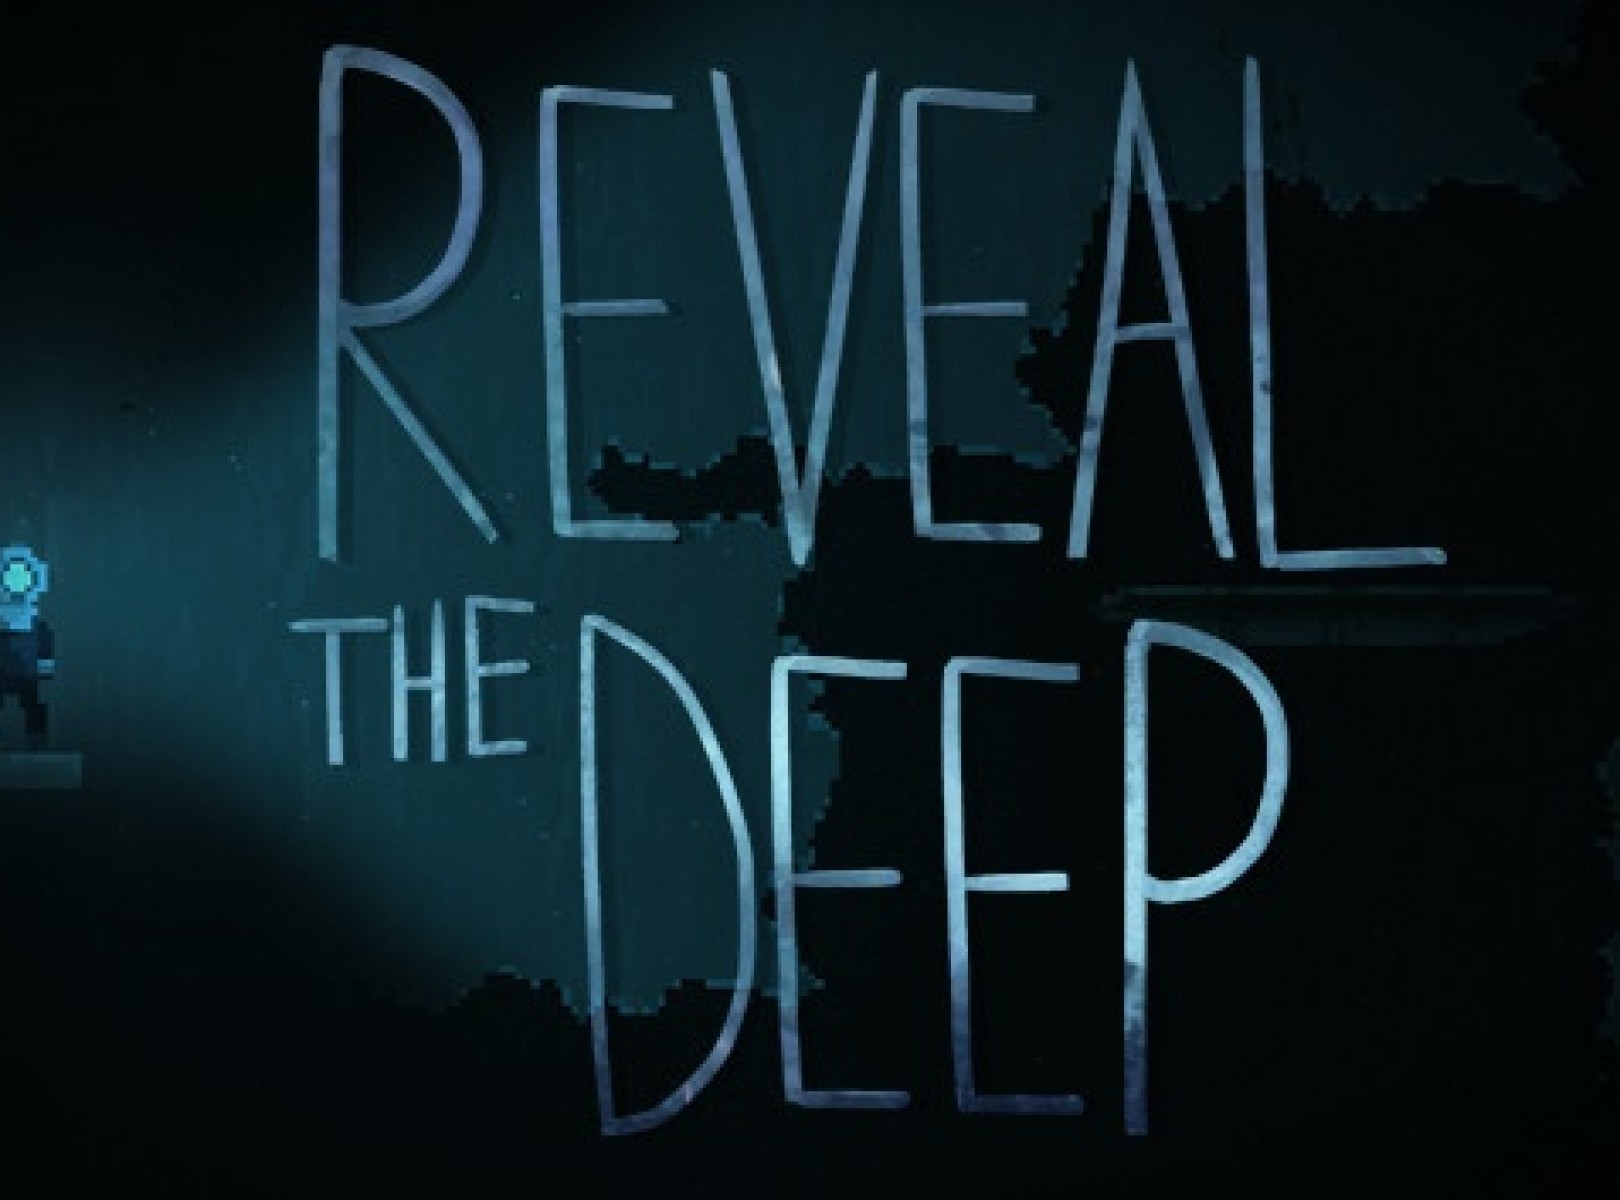 reveal-the-deep-review-digital-crack-network